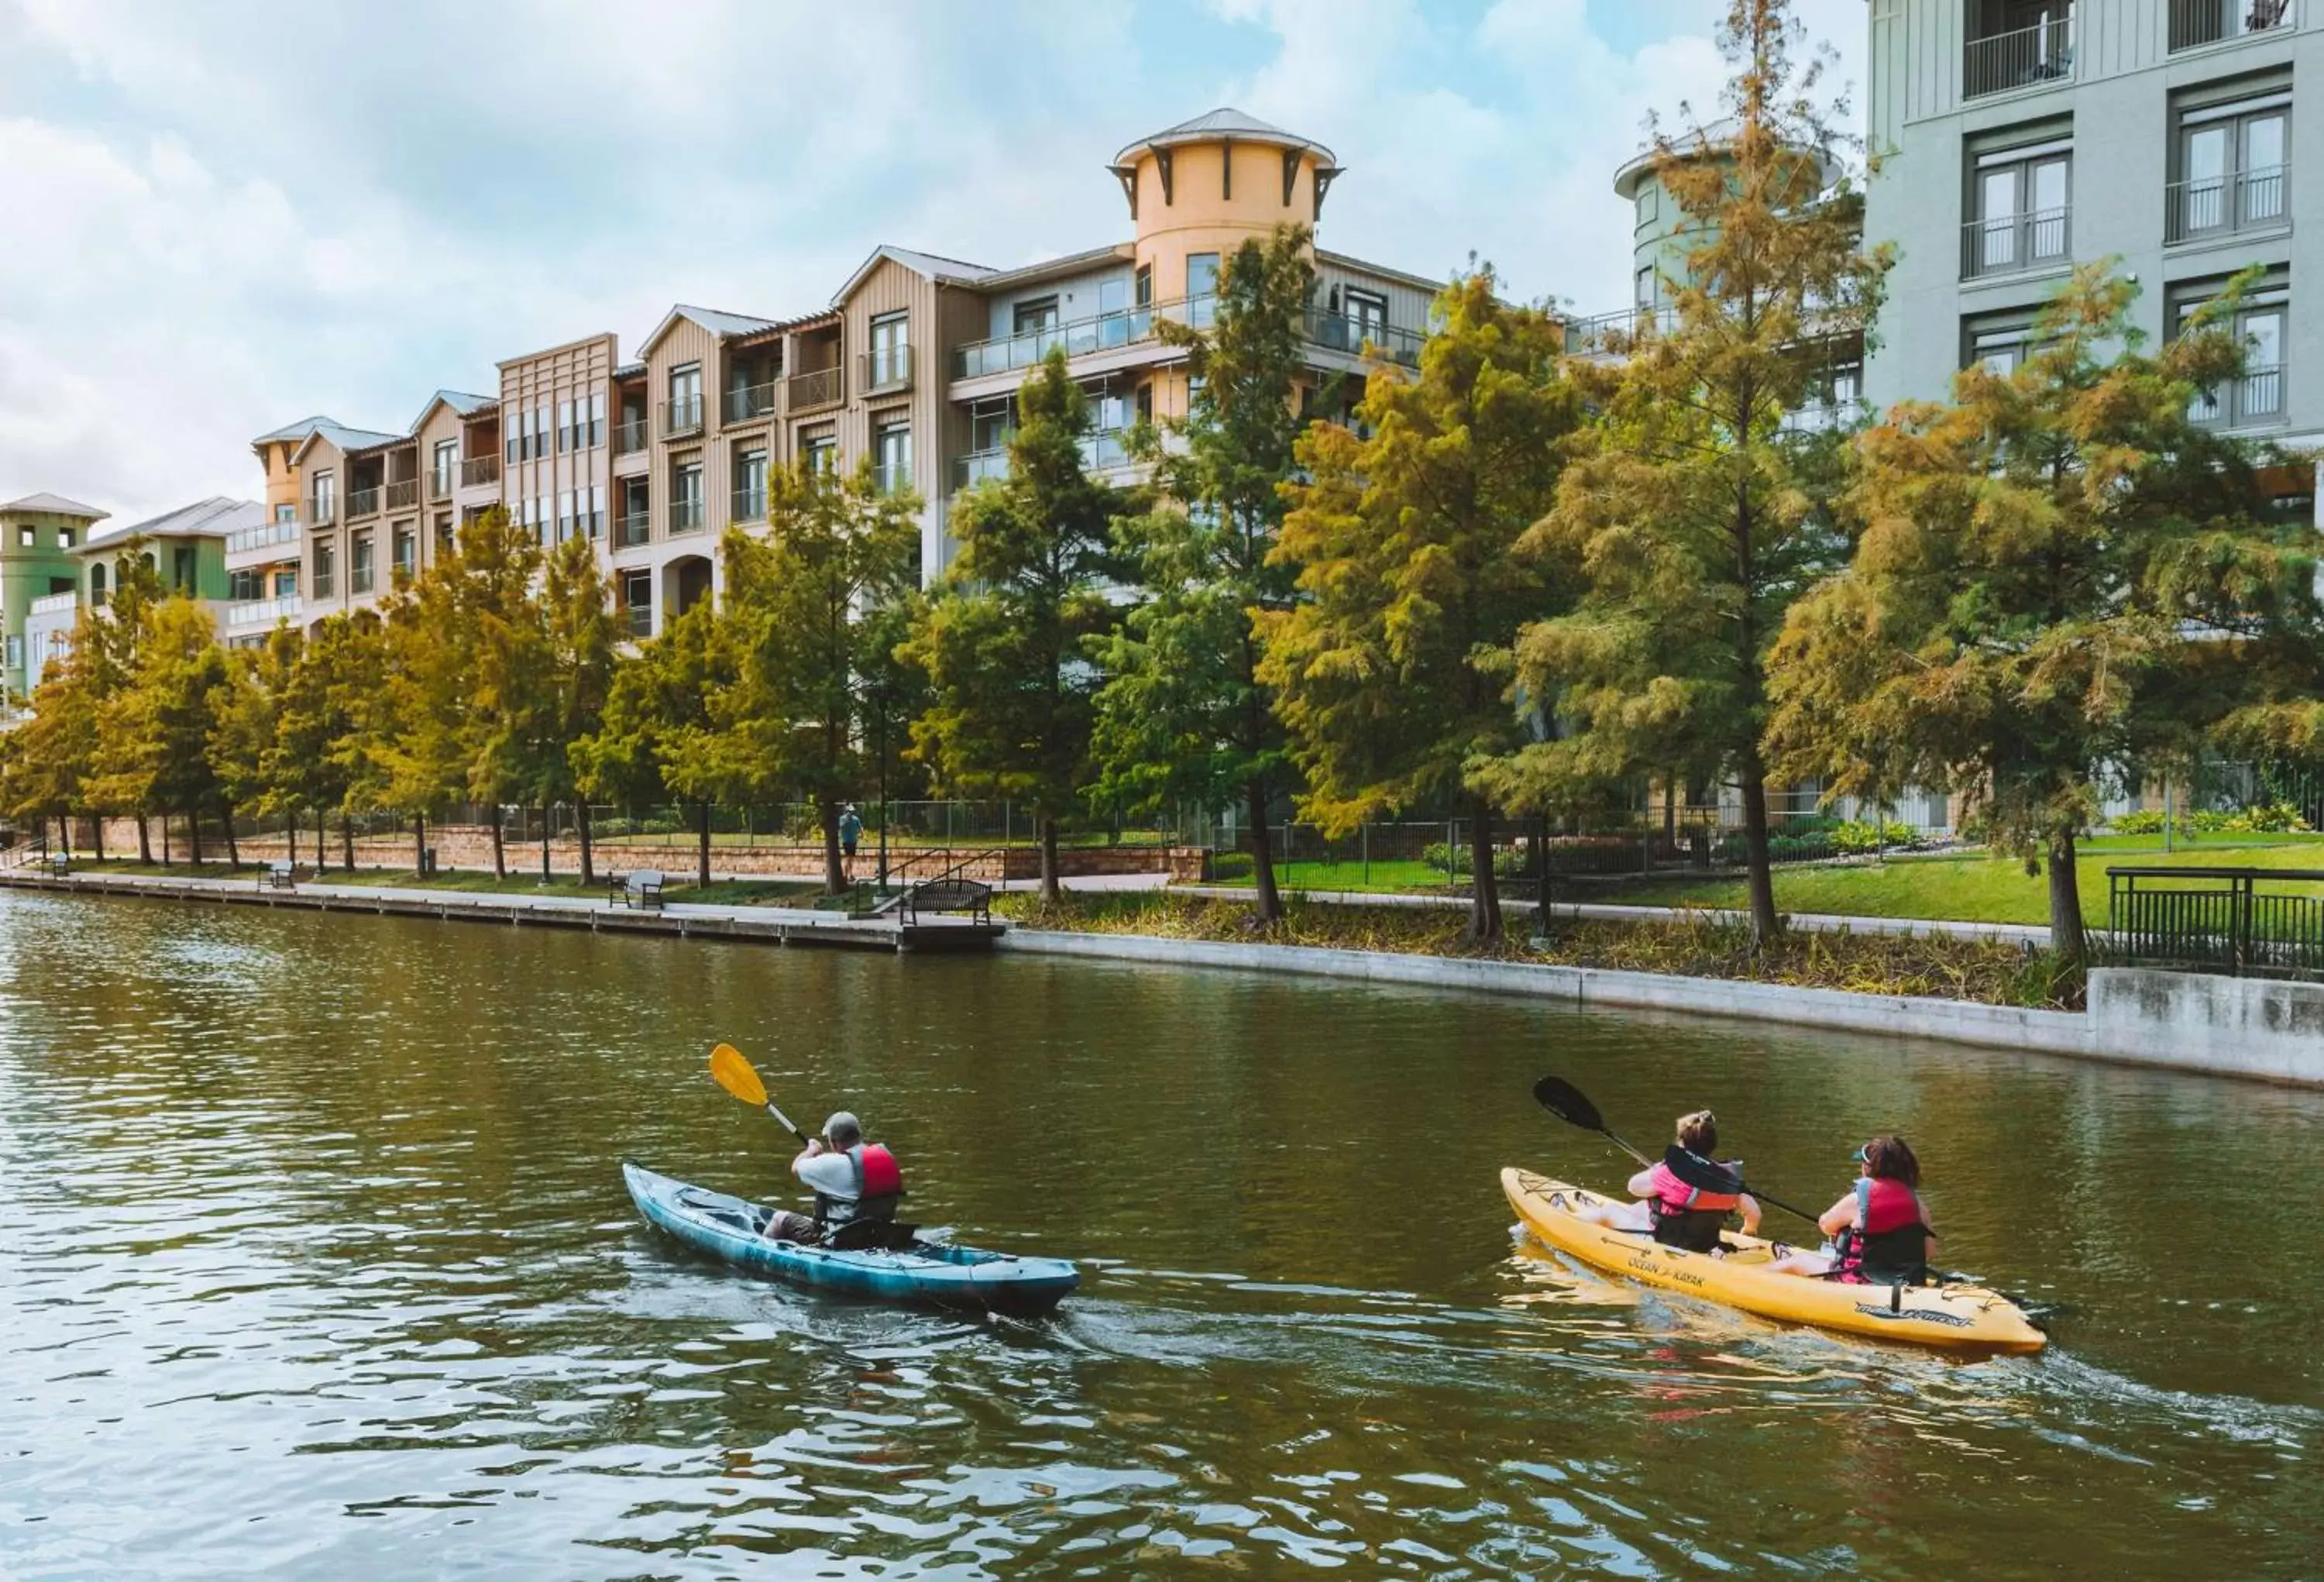 Off site, Canoeing in Hyatt Centric The Woodlands